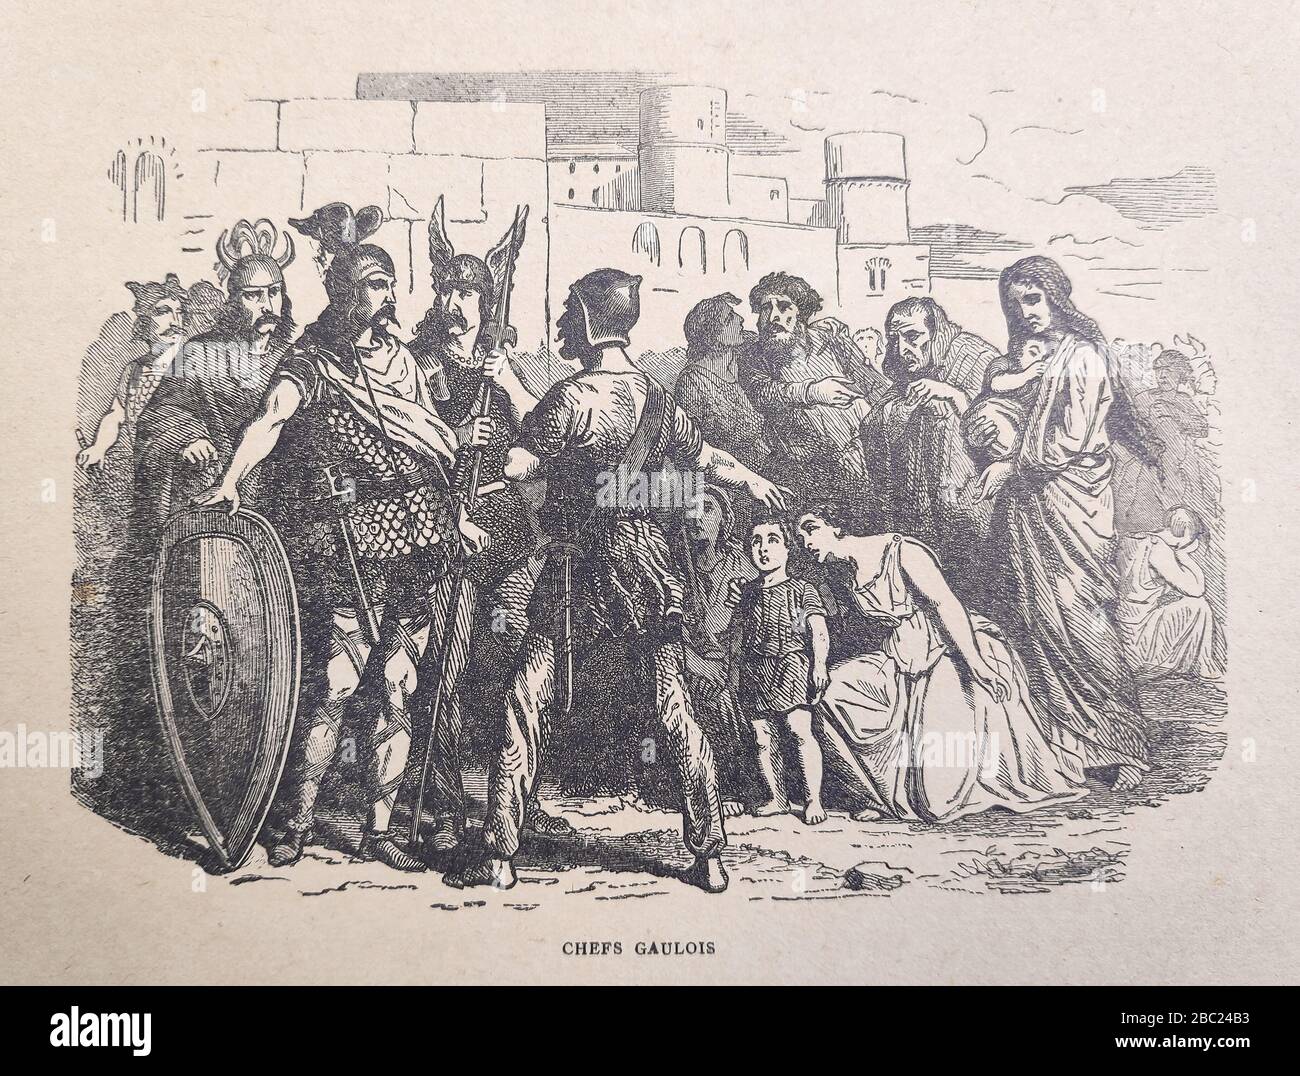 Illustration of a meeting of Gallic leaders by Gaildrau published in the late 19th century. Stock Photo